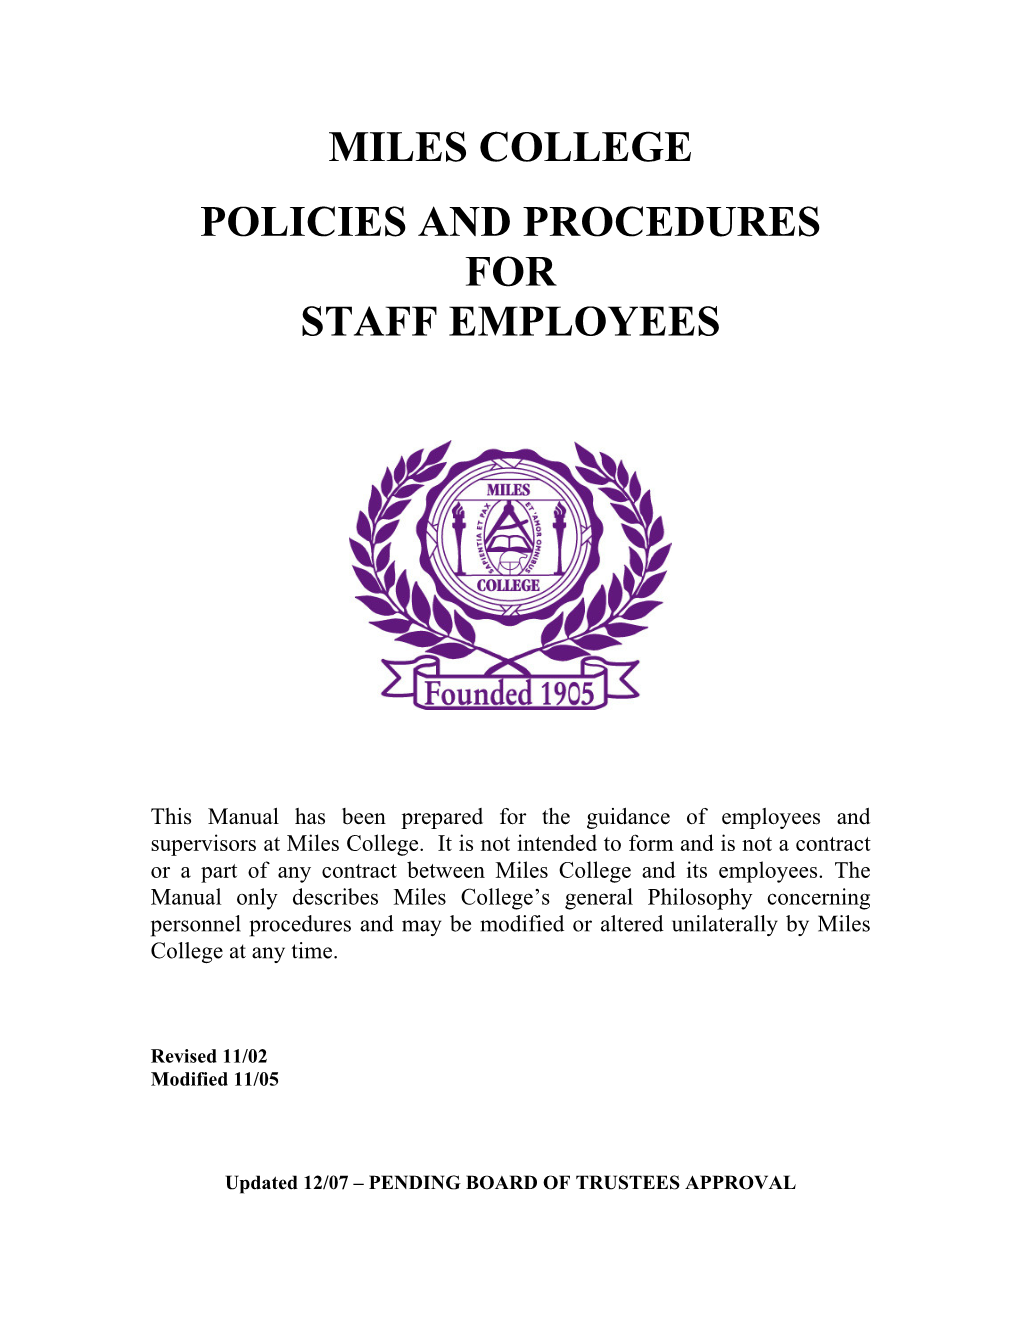 Miles College Policies and Procedures for Staff Employees